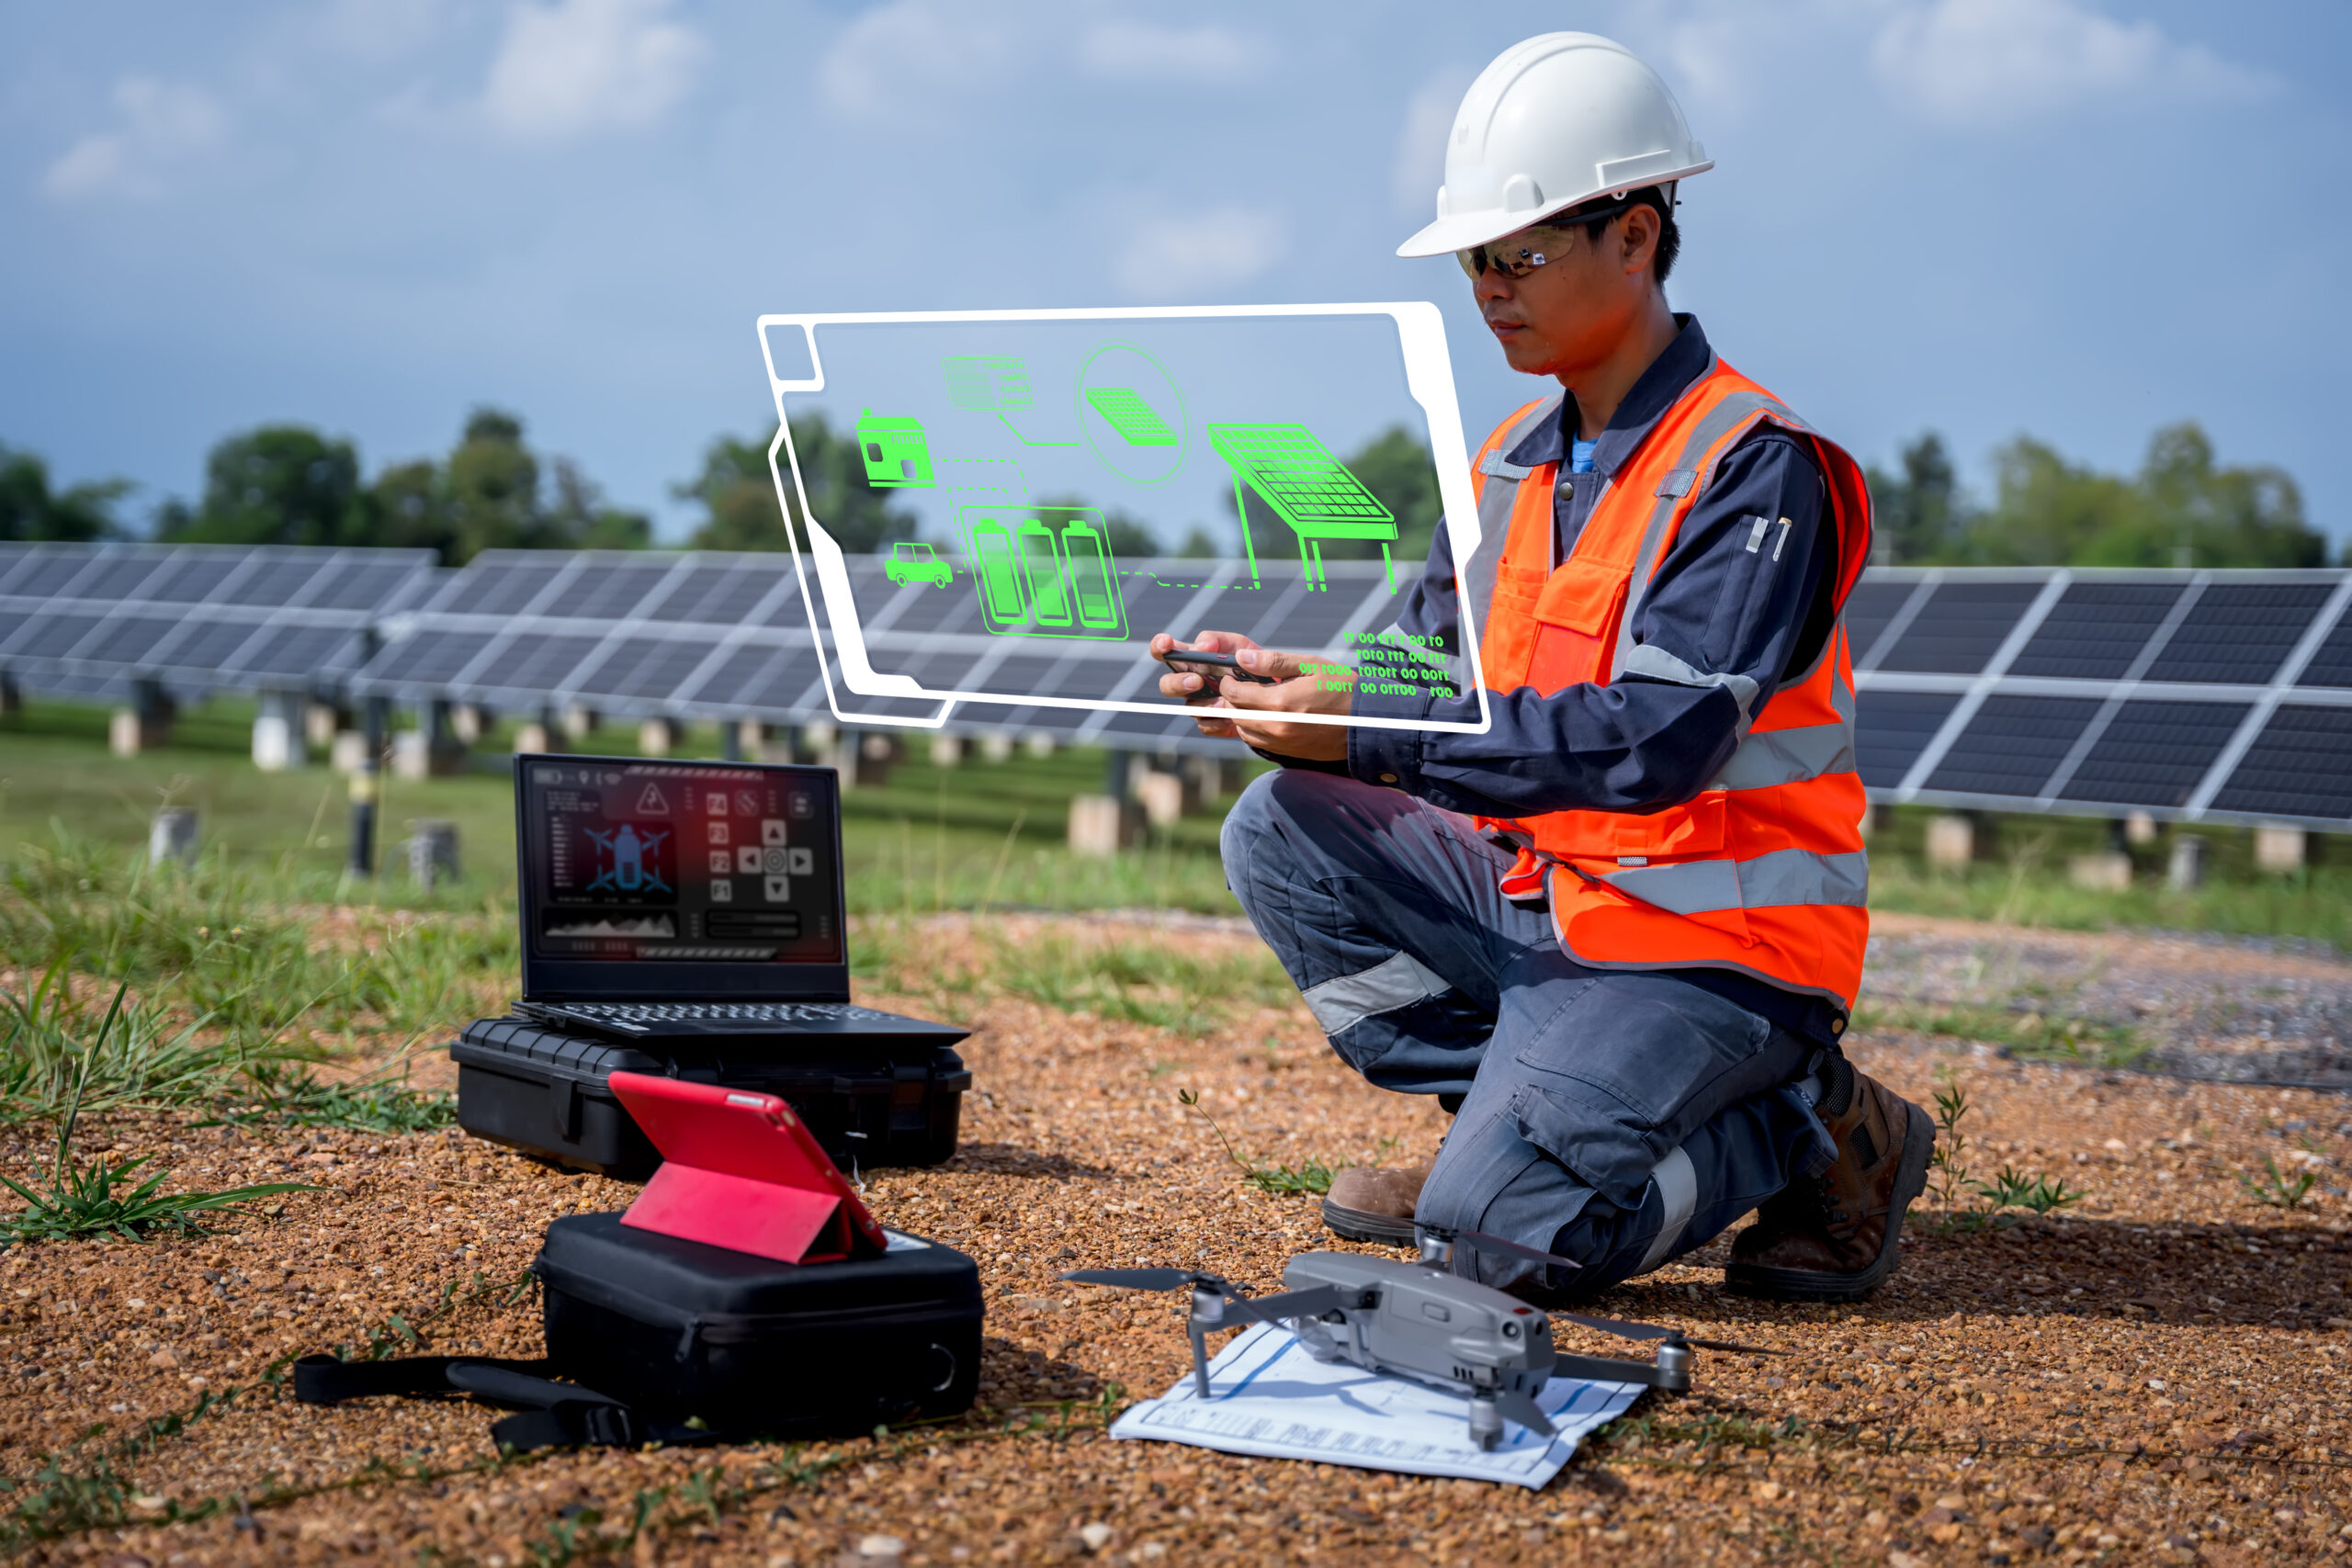 Engineers preparing drones to fly, inspecting the solar cells at high angles to thermo scan the solar panel for potential malfunctions and overheating. Alternative energy to conserve world's energy.